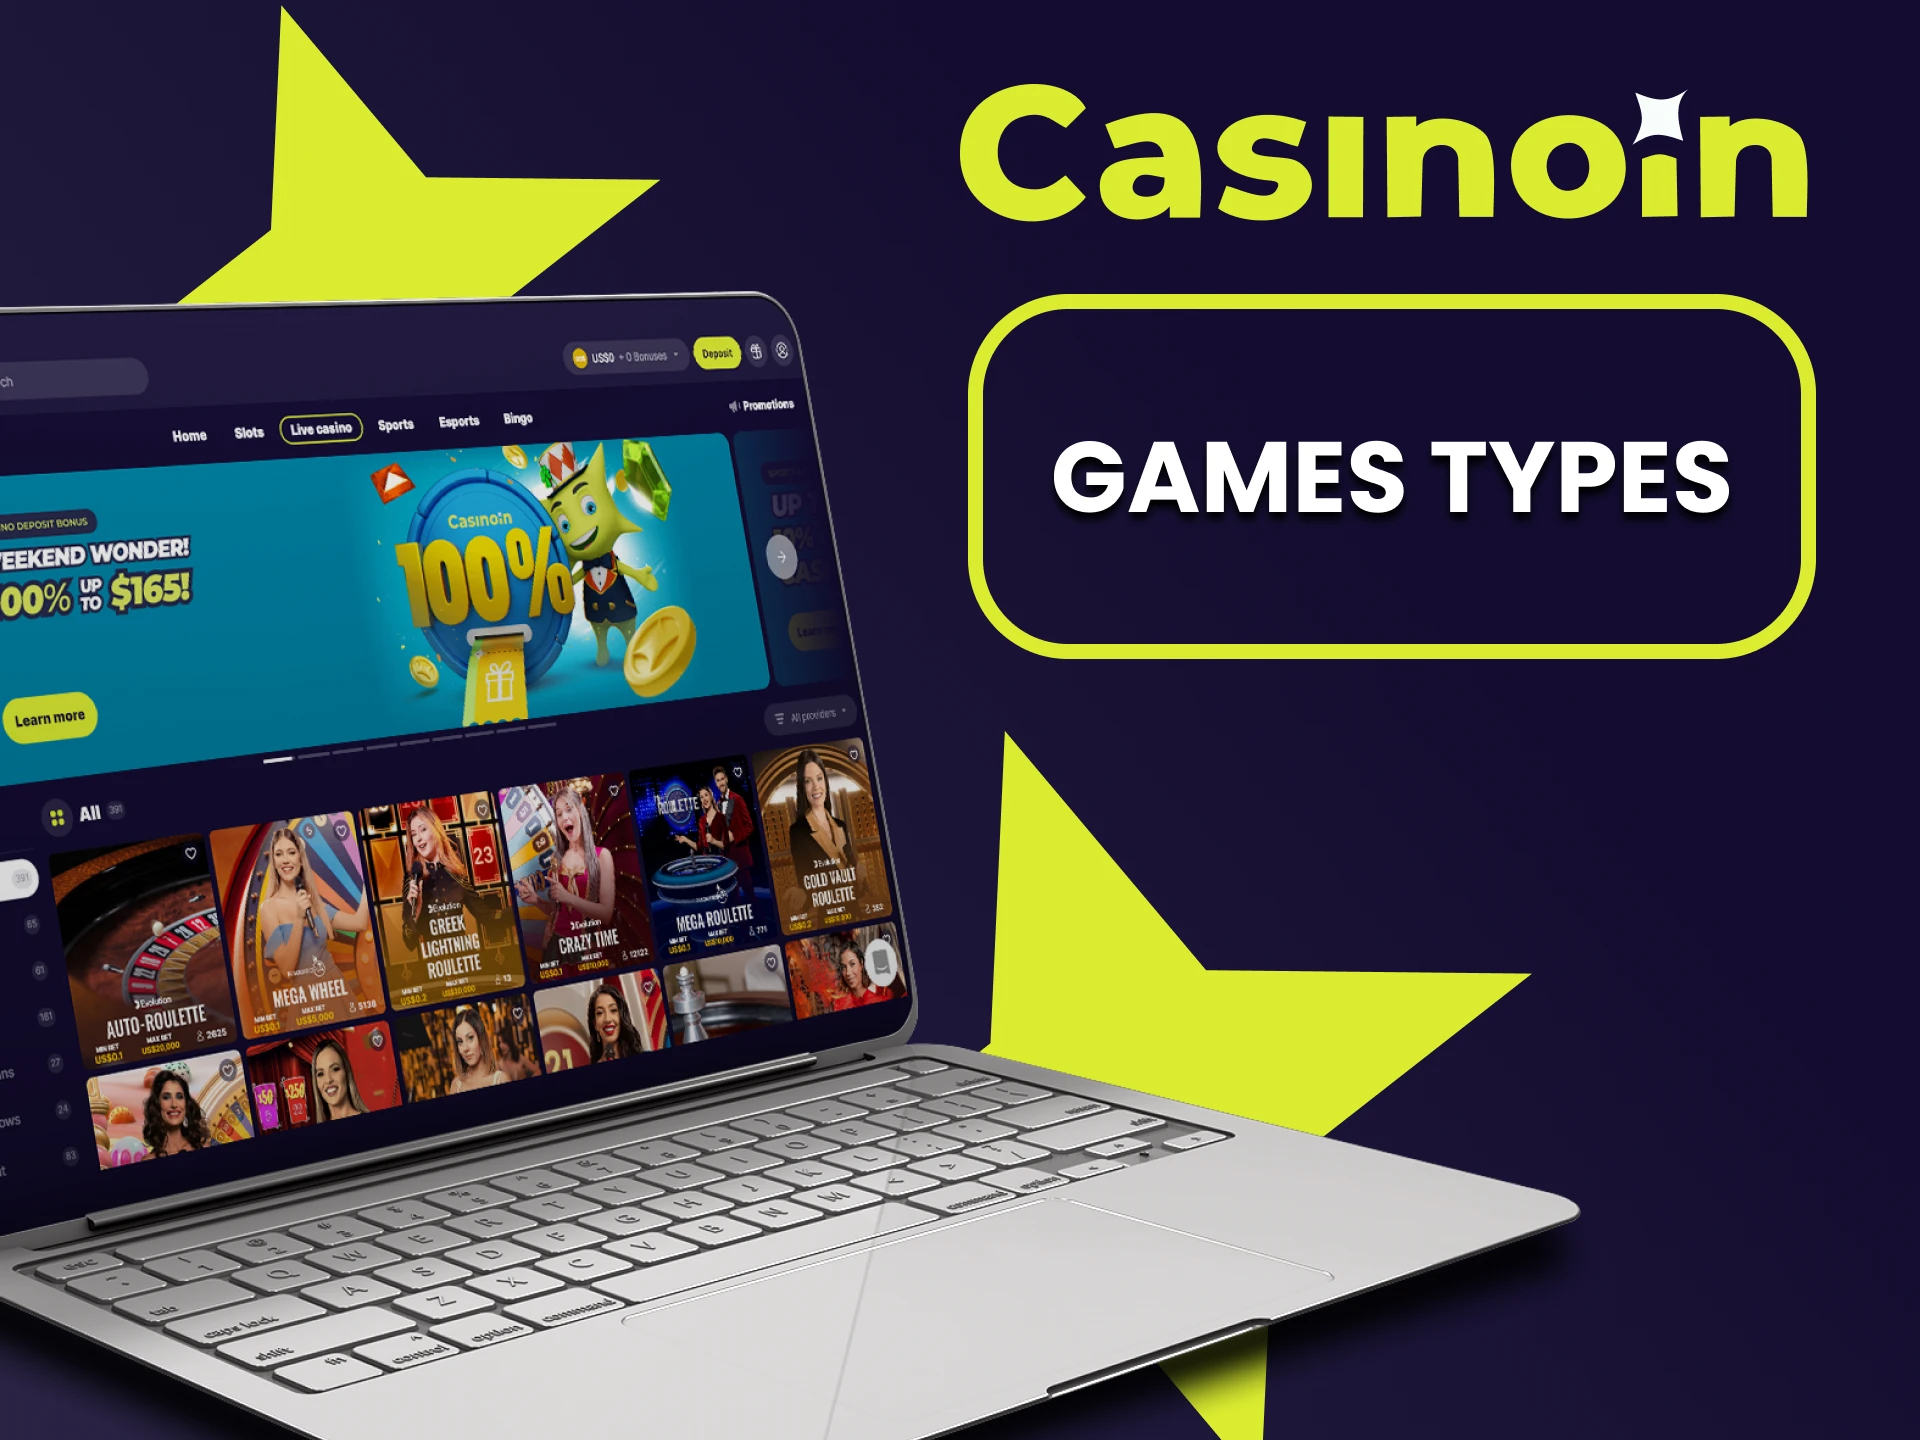 We will tell you what games are available at Casinoin.